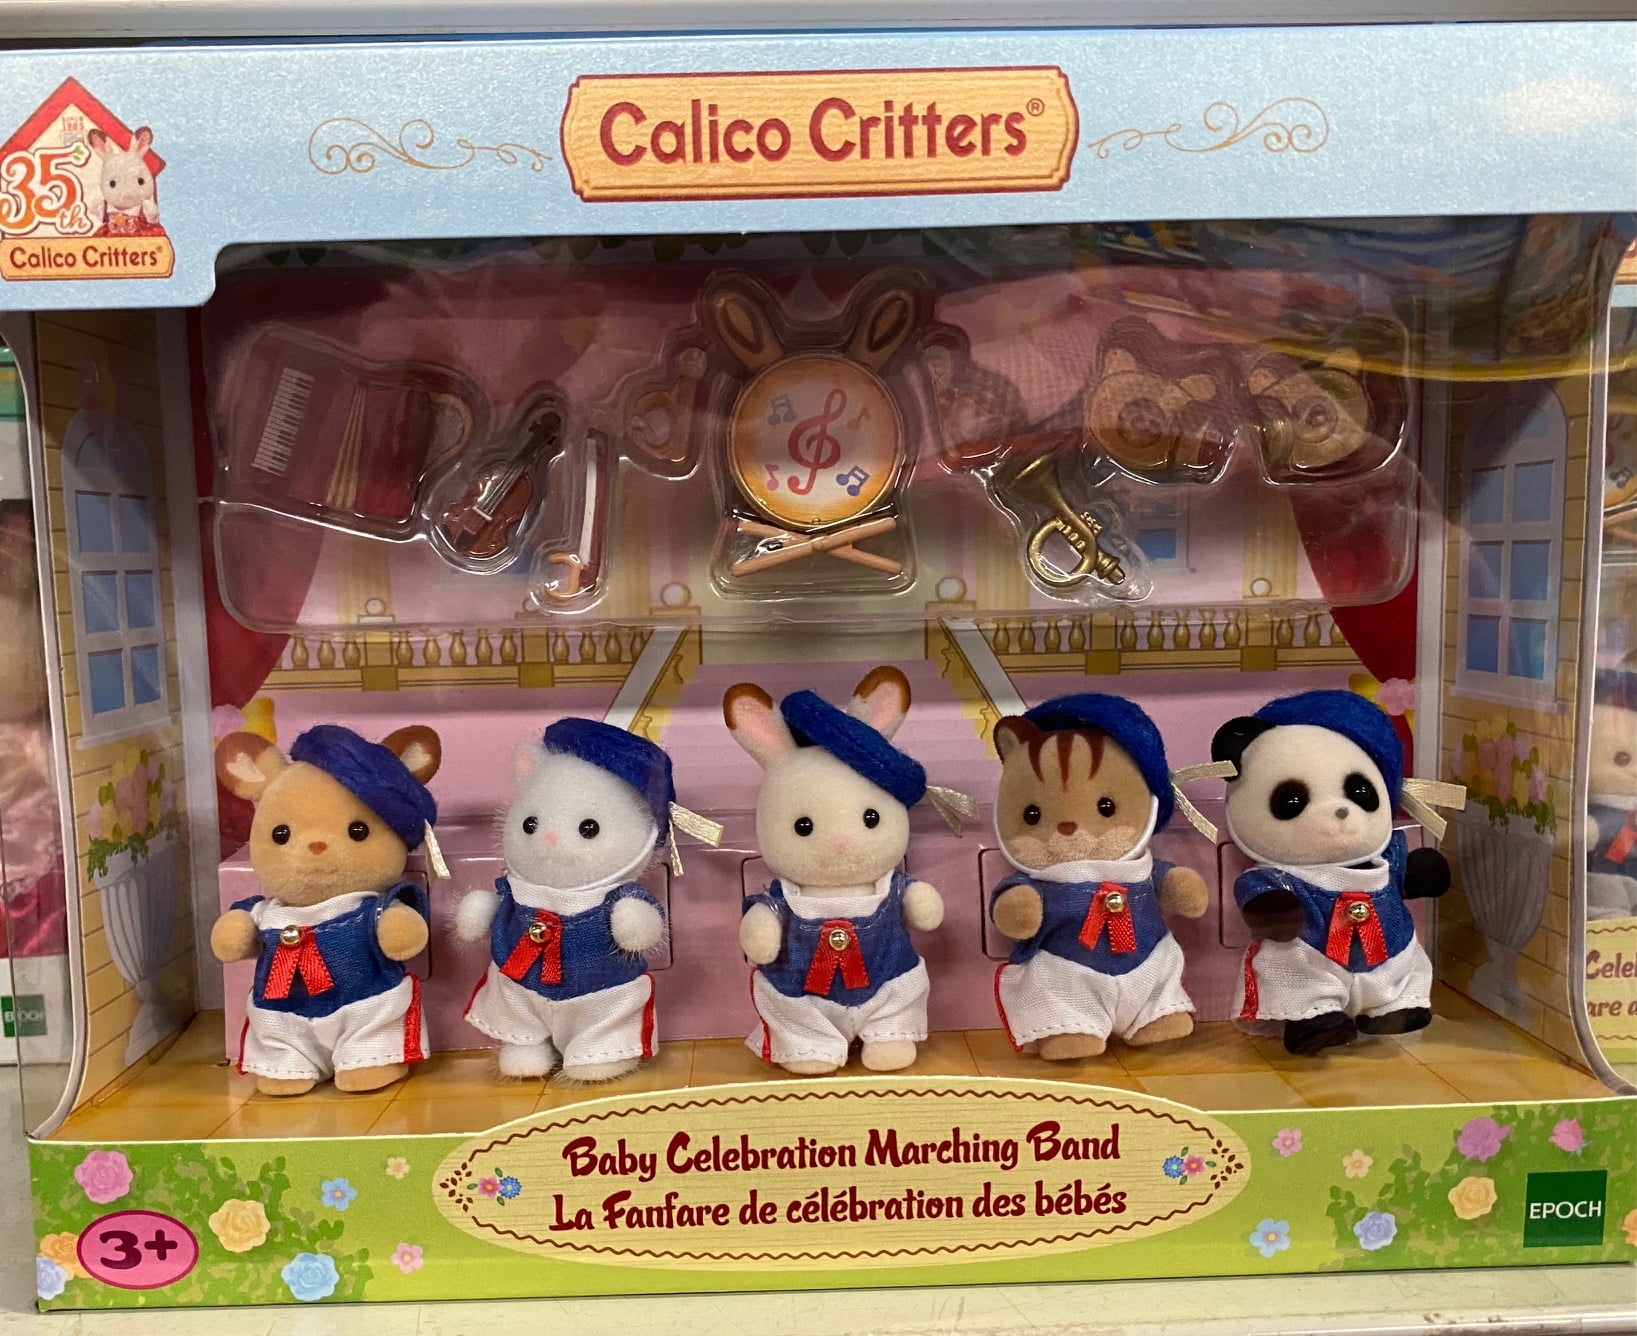 Calico Critters Baby Celebration Marching Band Kids Play CF5505 for sale online